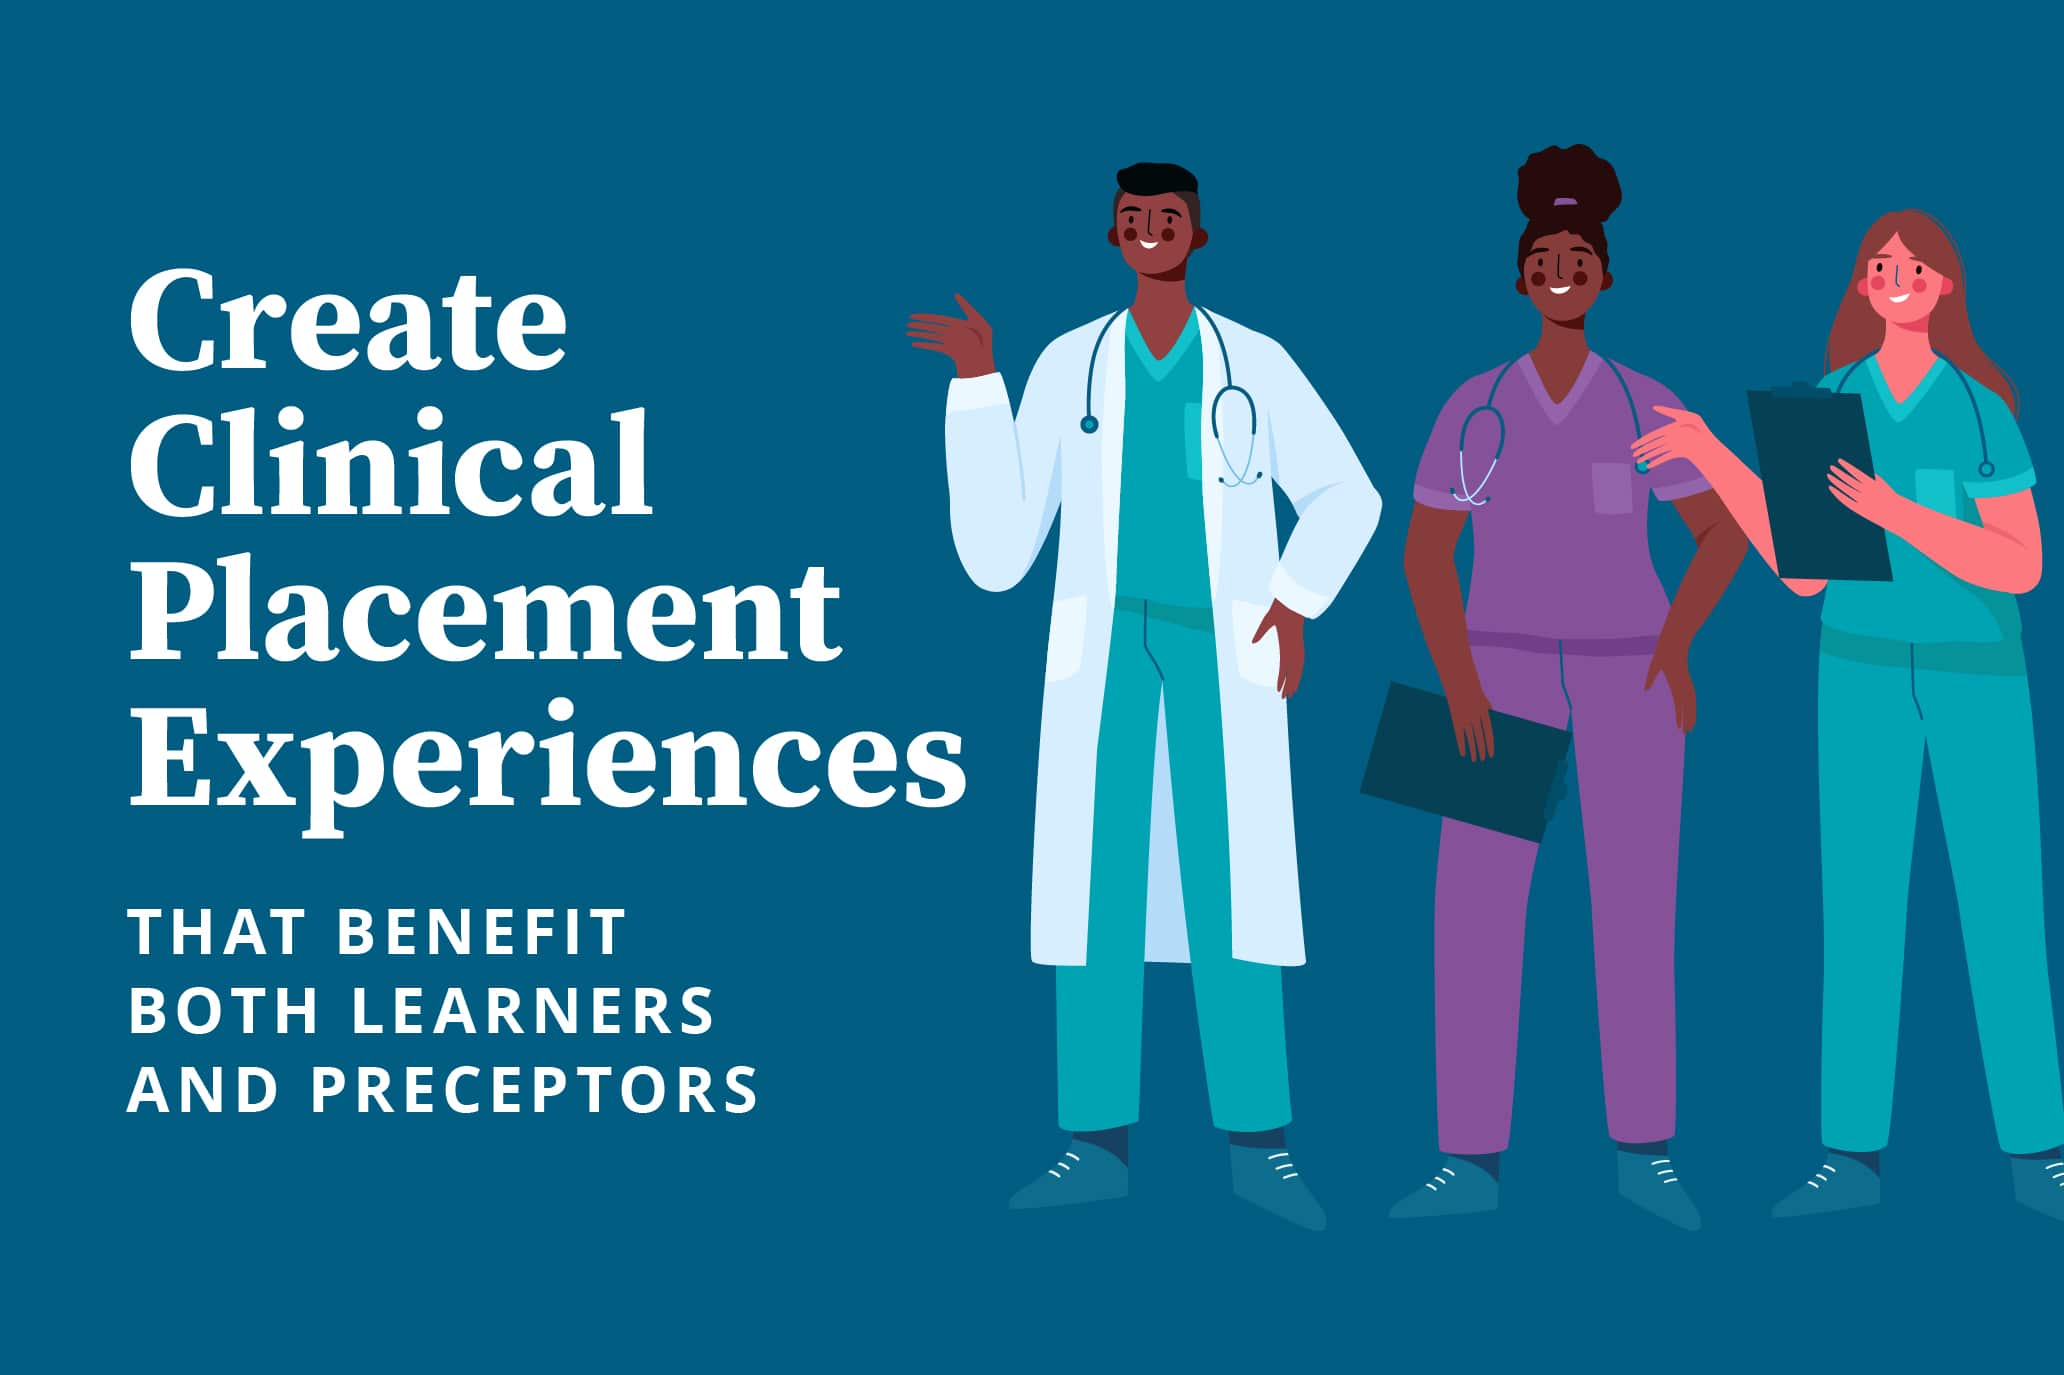 Create Clinical Placement Experiences That Benefit Both Learners and Preceptors